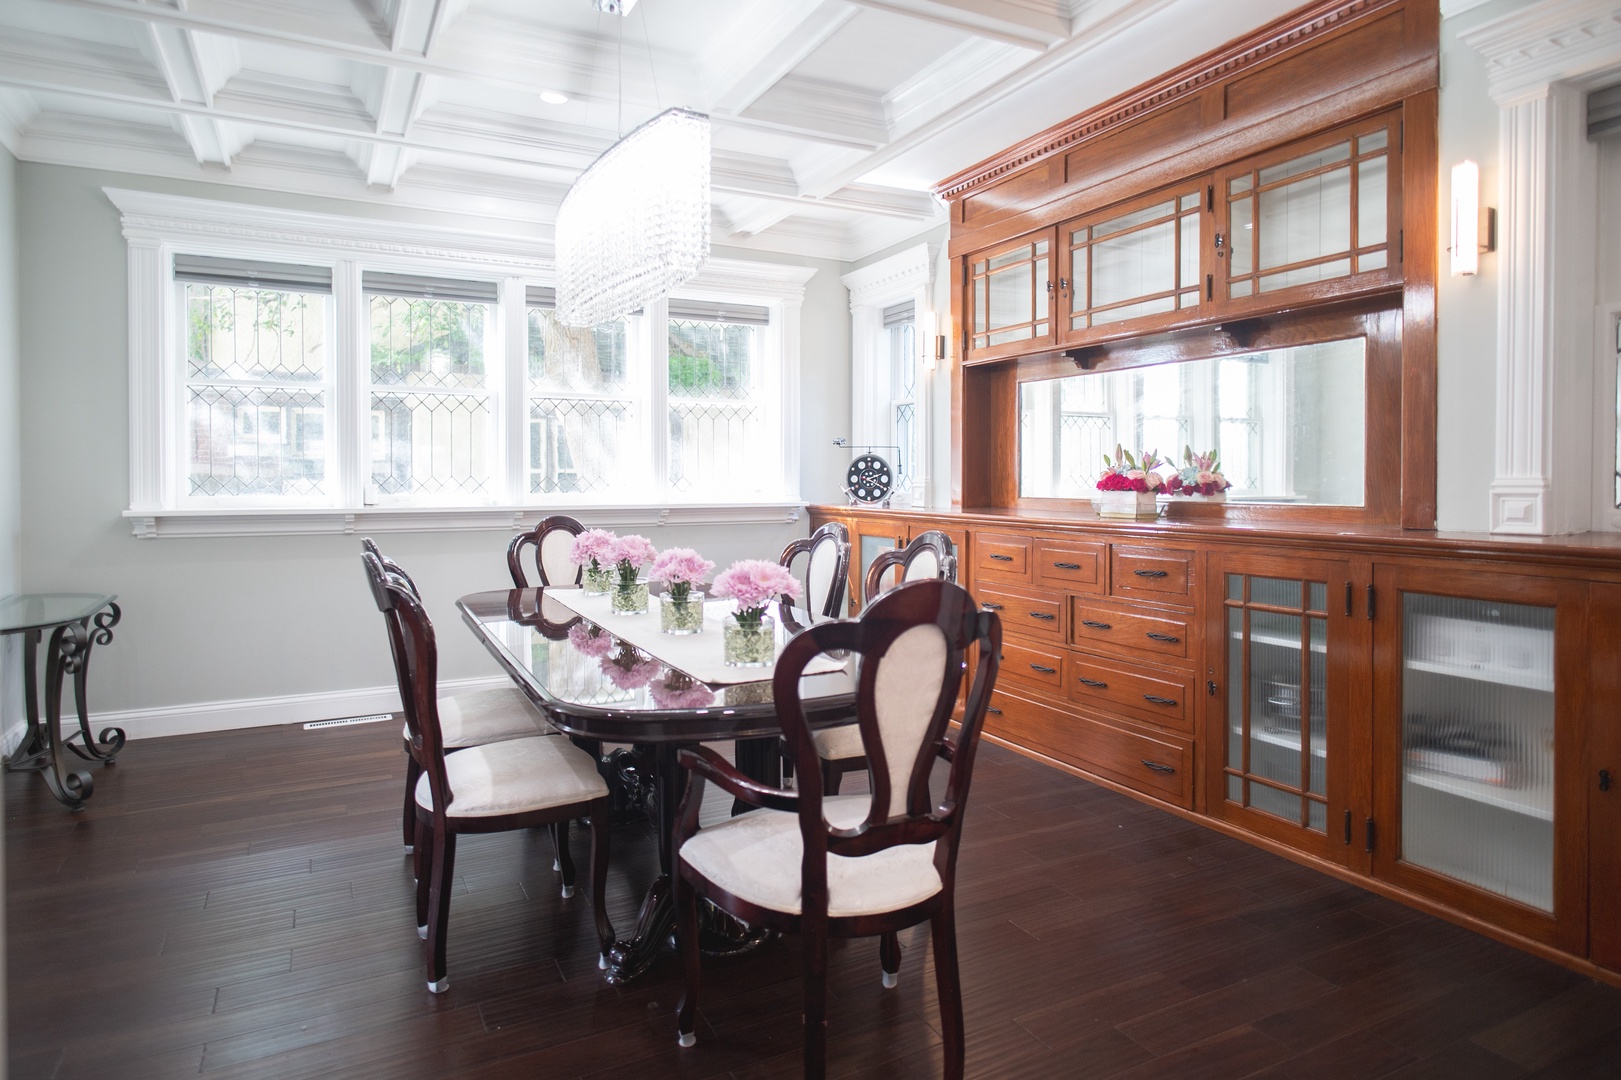 Elegant formal meals can be enjoyed in the dining room, offering seating for 6